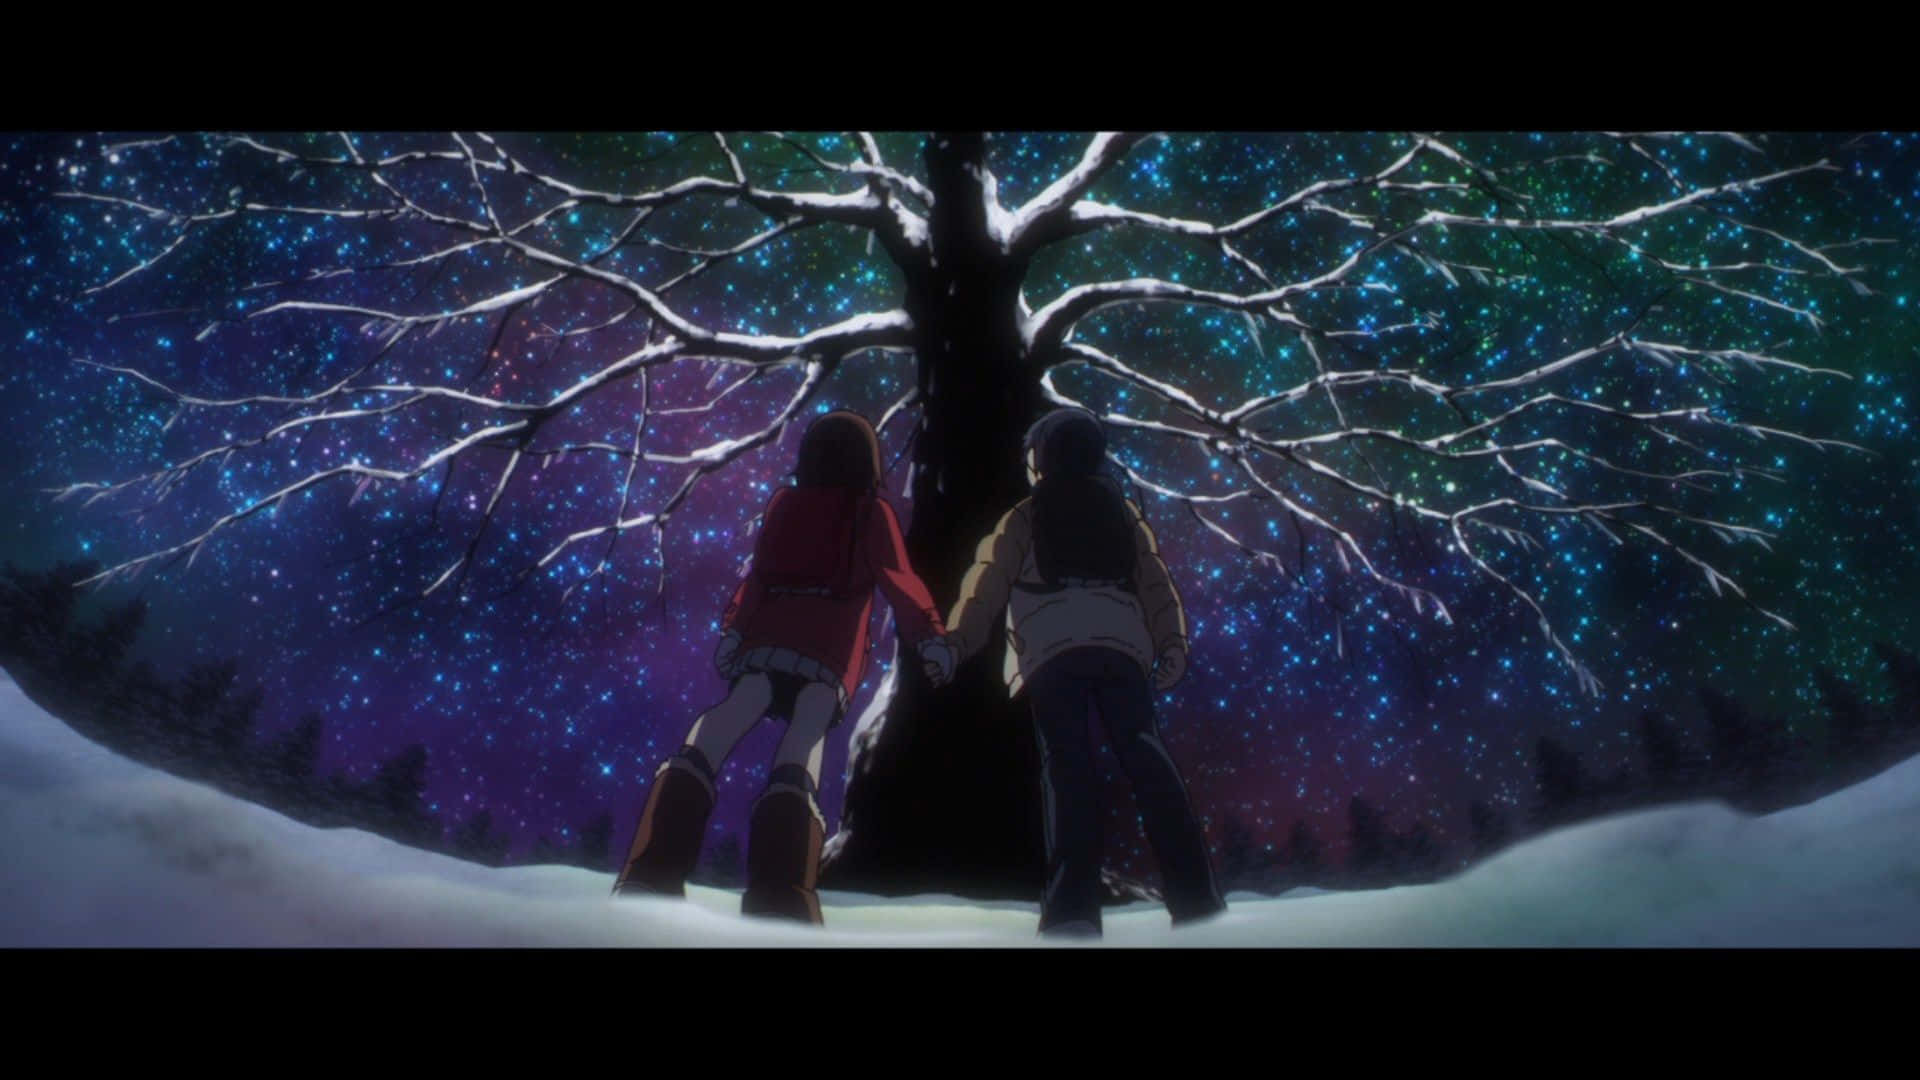 Join the story of 'Erased' and unravel the mysterious disappearance.